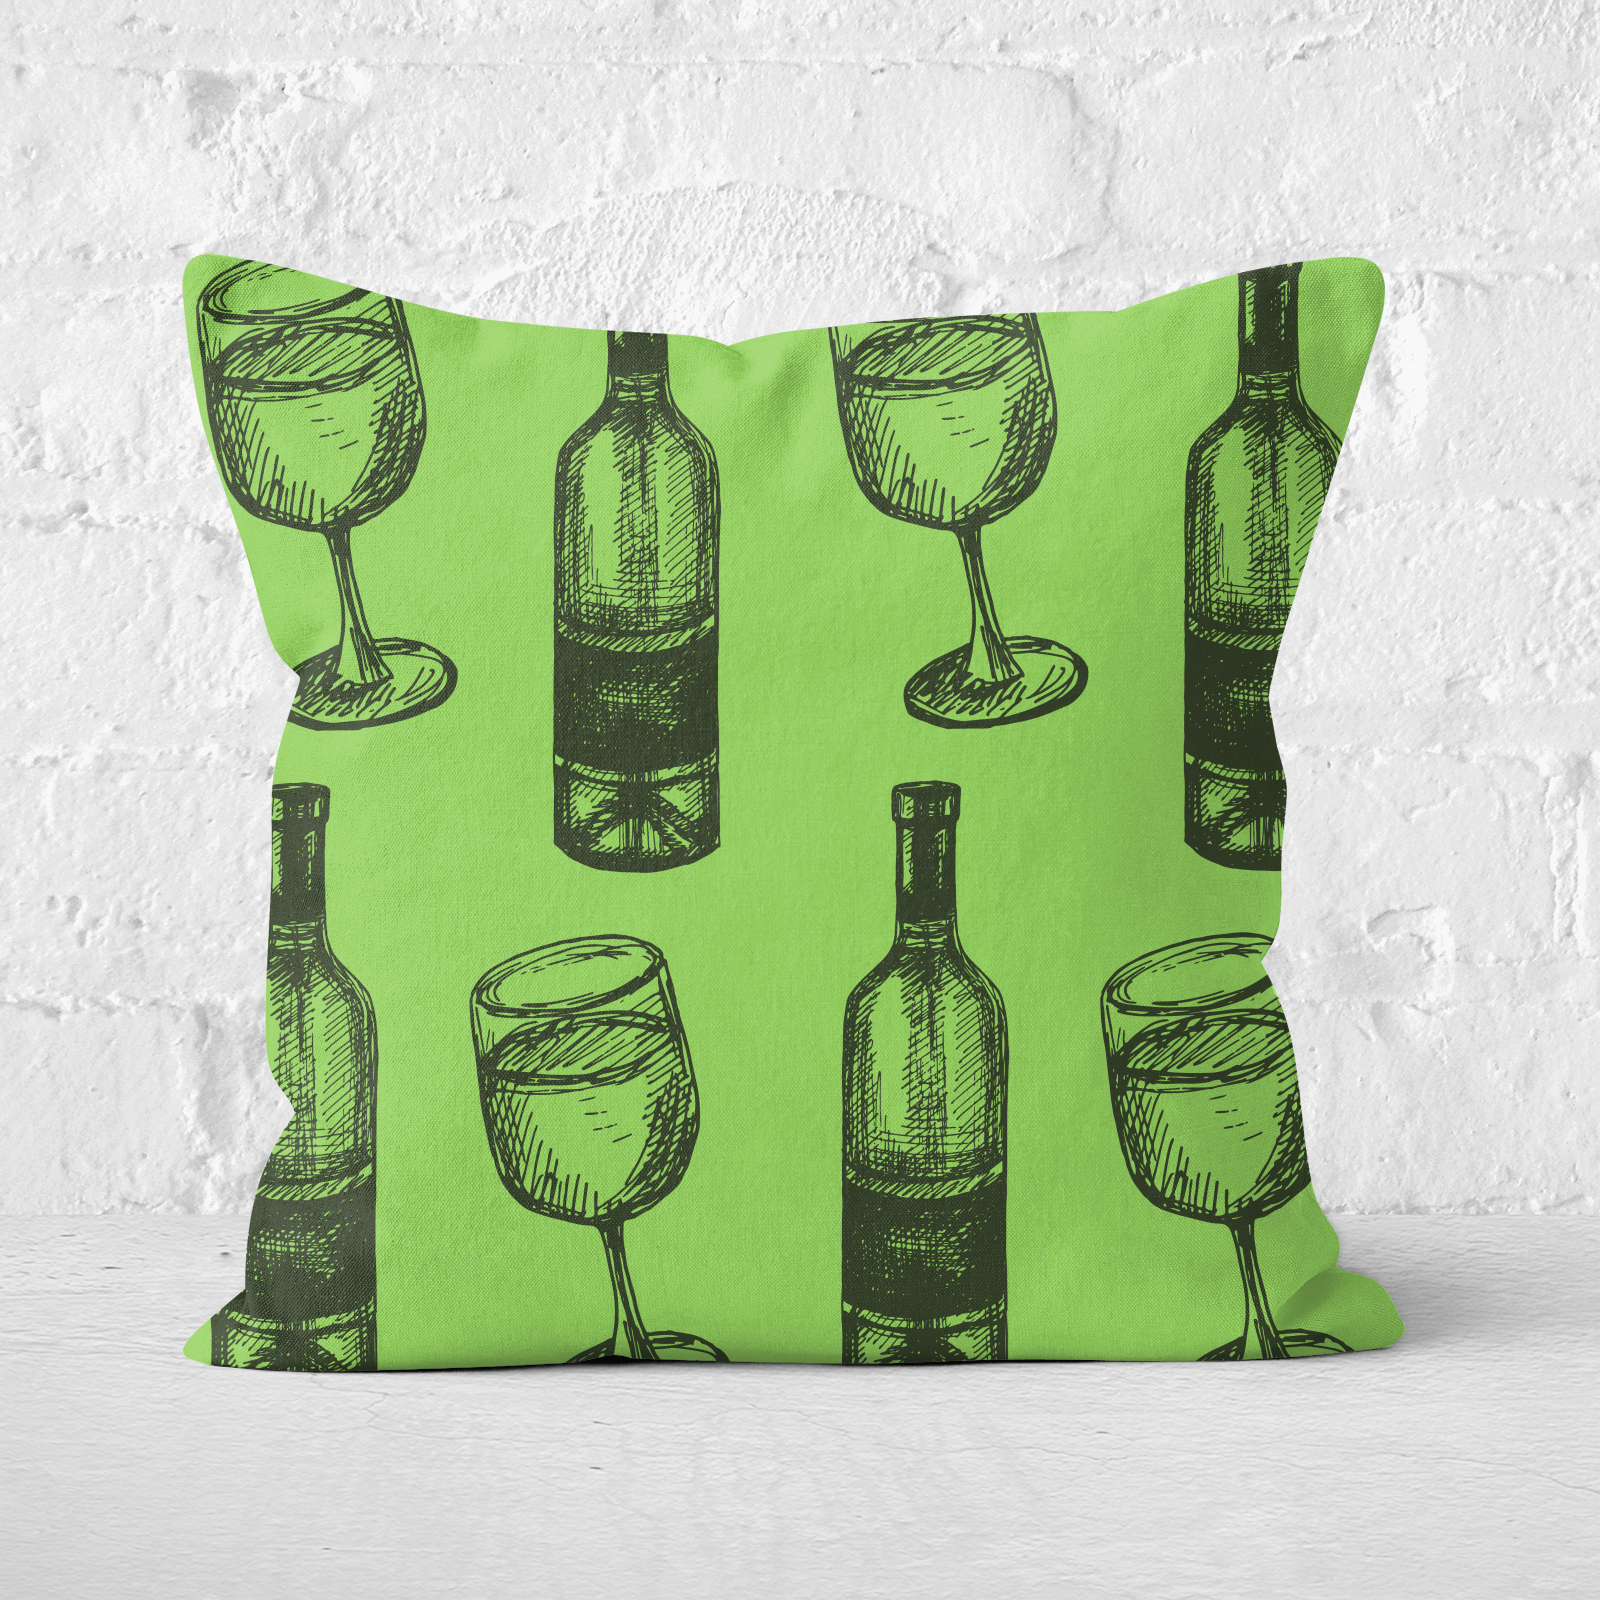 White Wine And Bottle Square Cushion - 60x60cm - Soft Touch